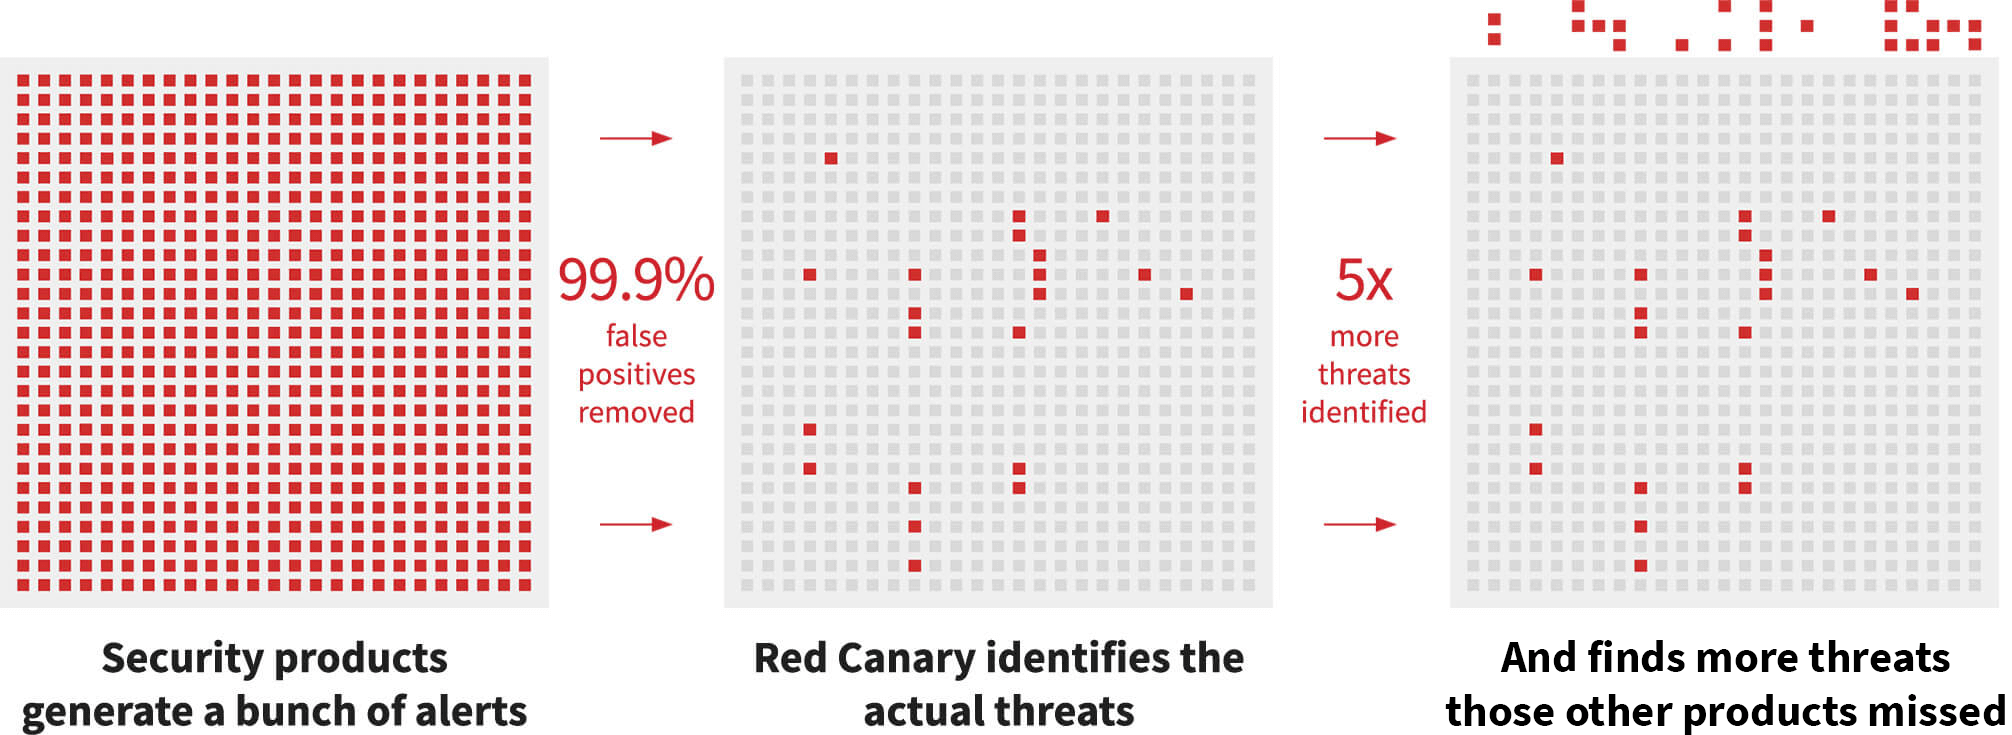 Red Canary identifies 5x more threats than other providers